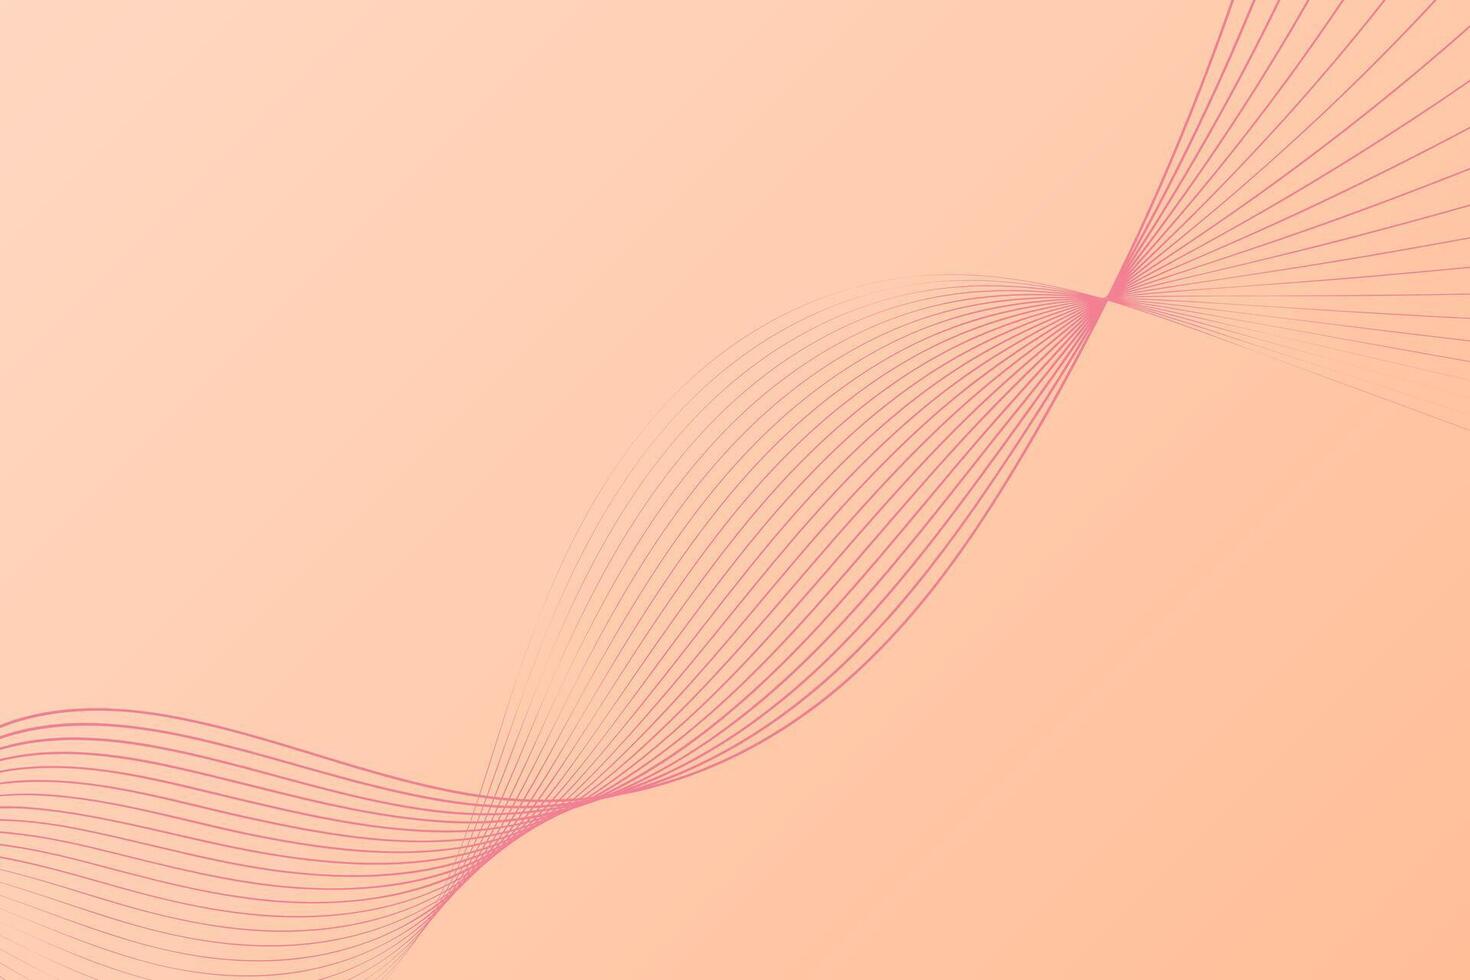 Vibrant pink background featuring abstract wavy lines vector